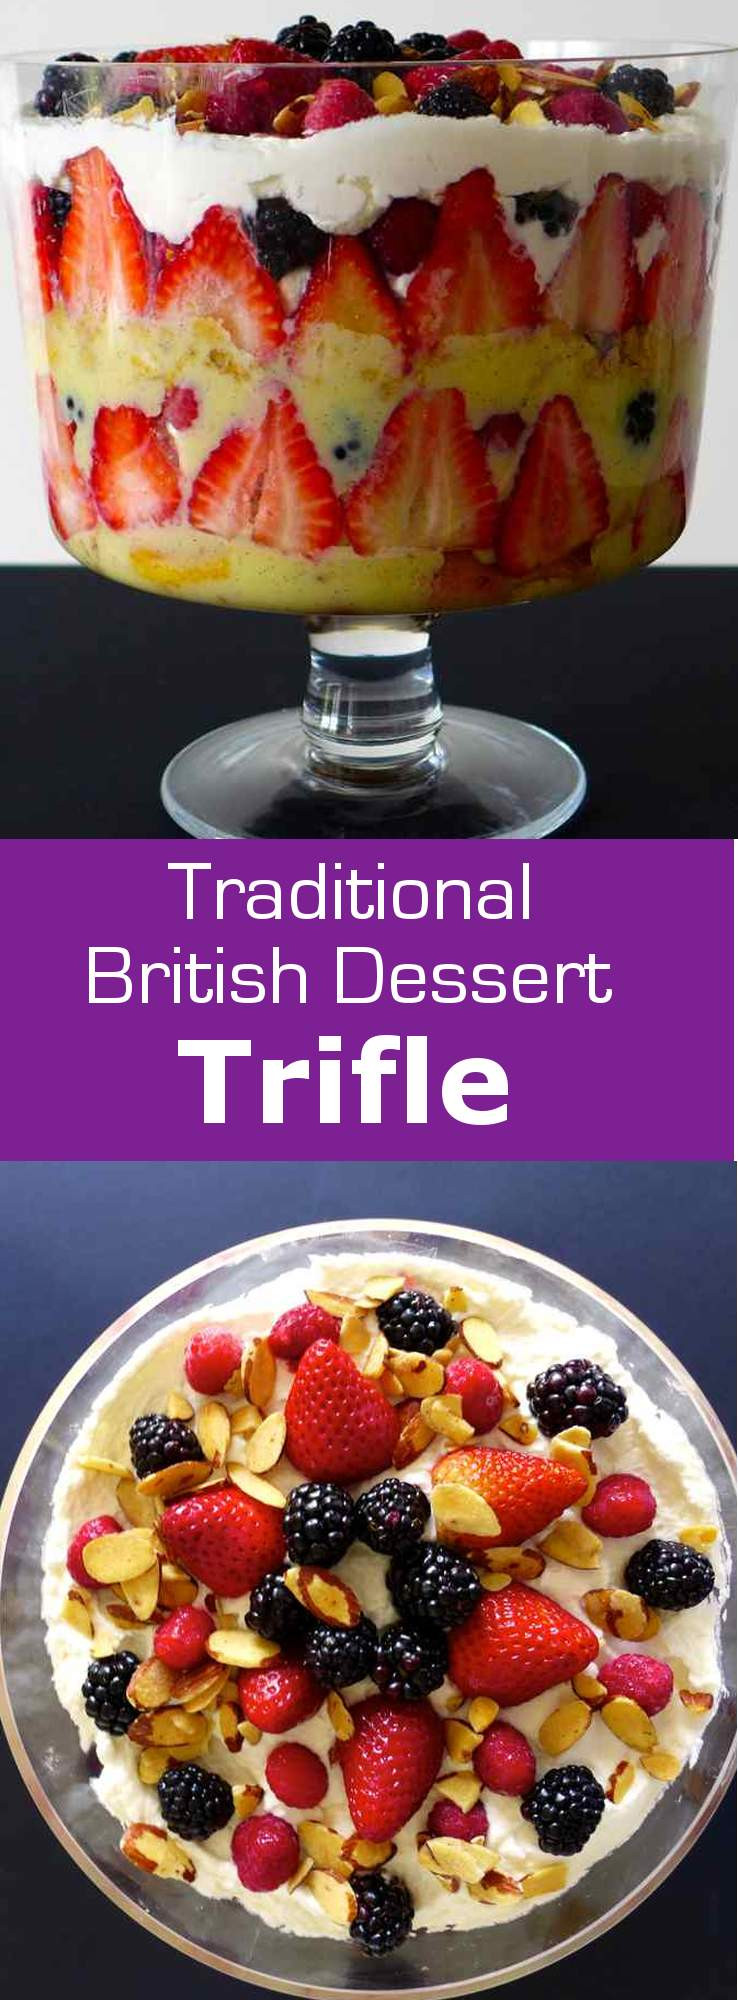 Traditional New Year'S Desserts
 Trifle Authentic English Recipe